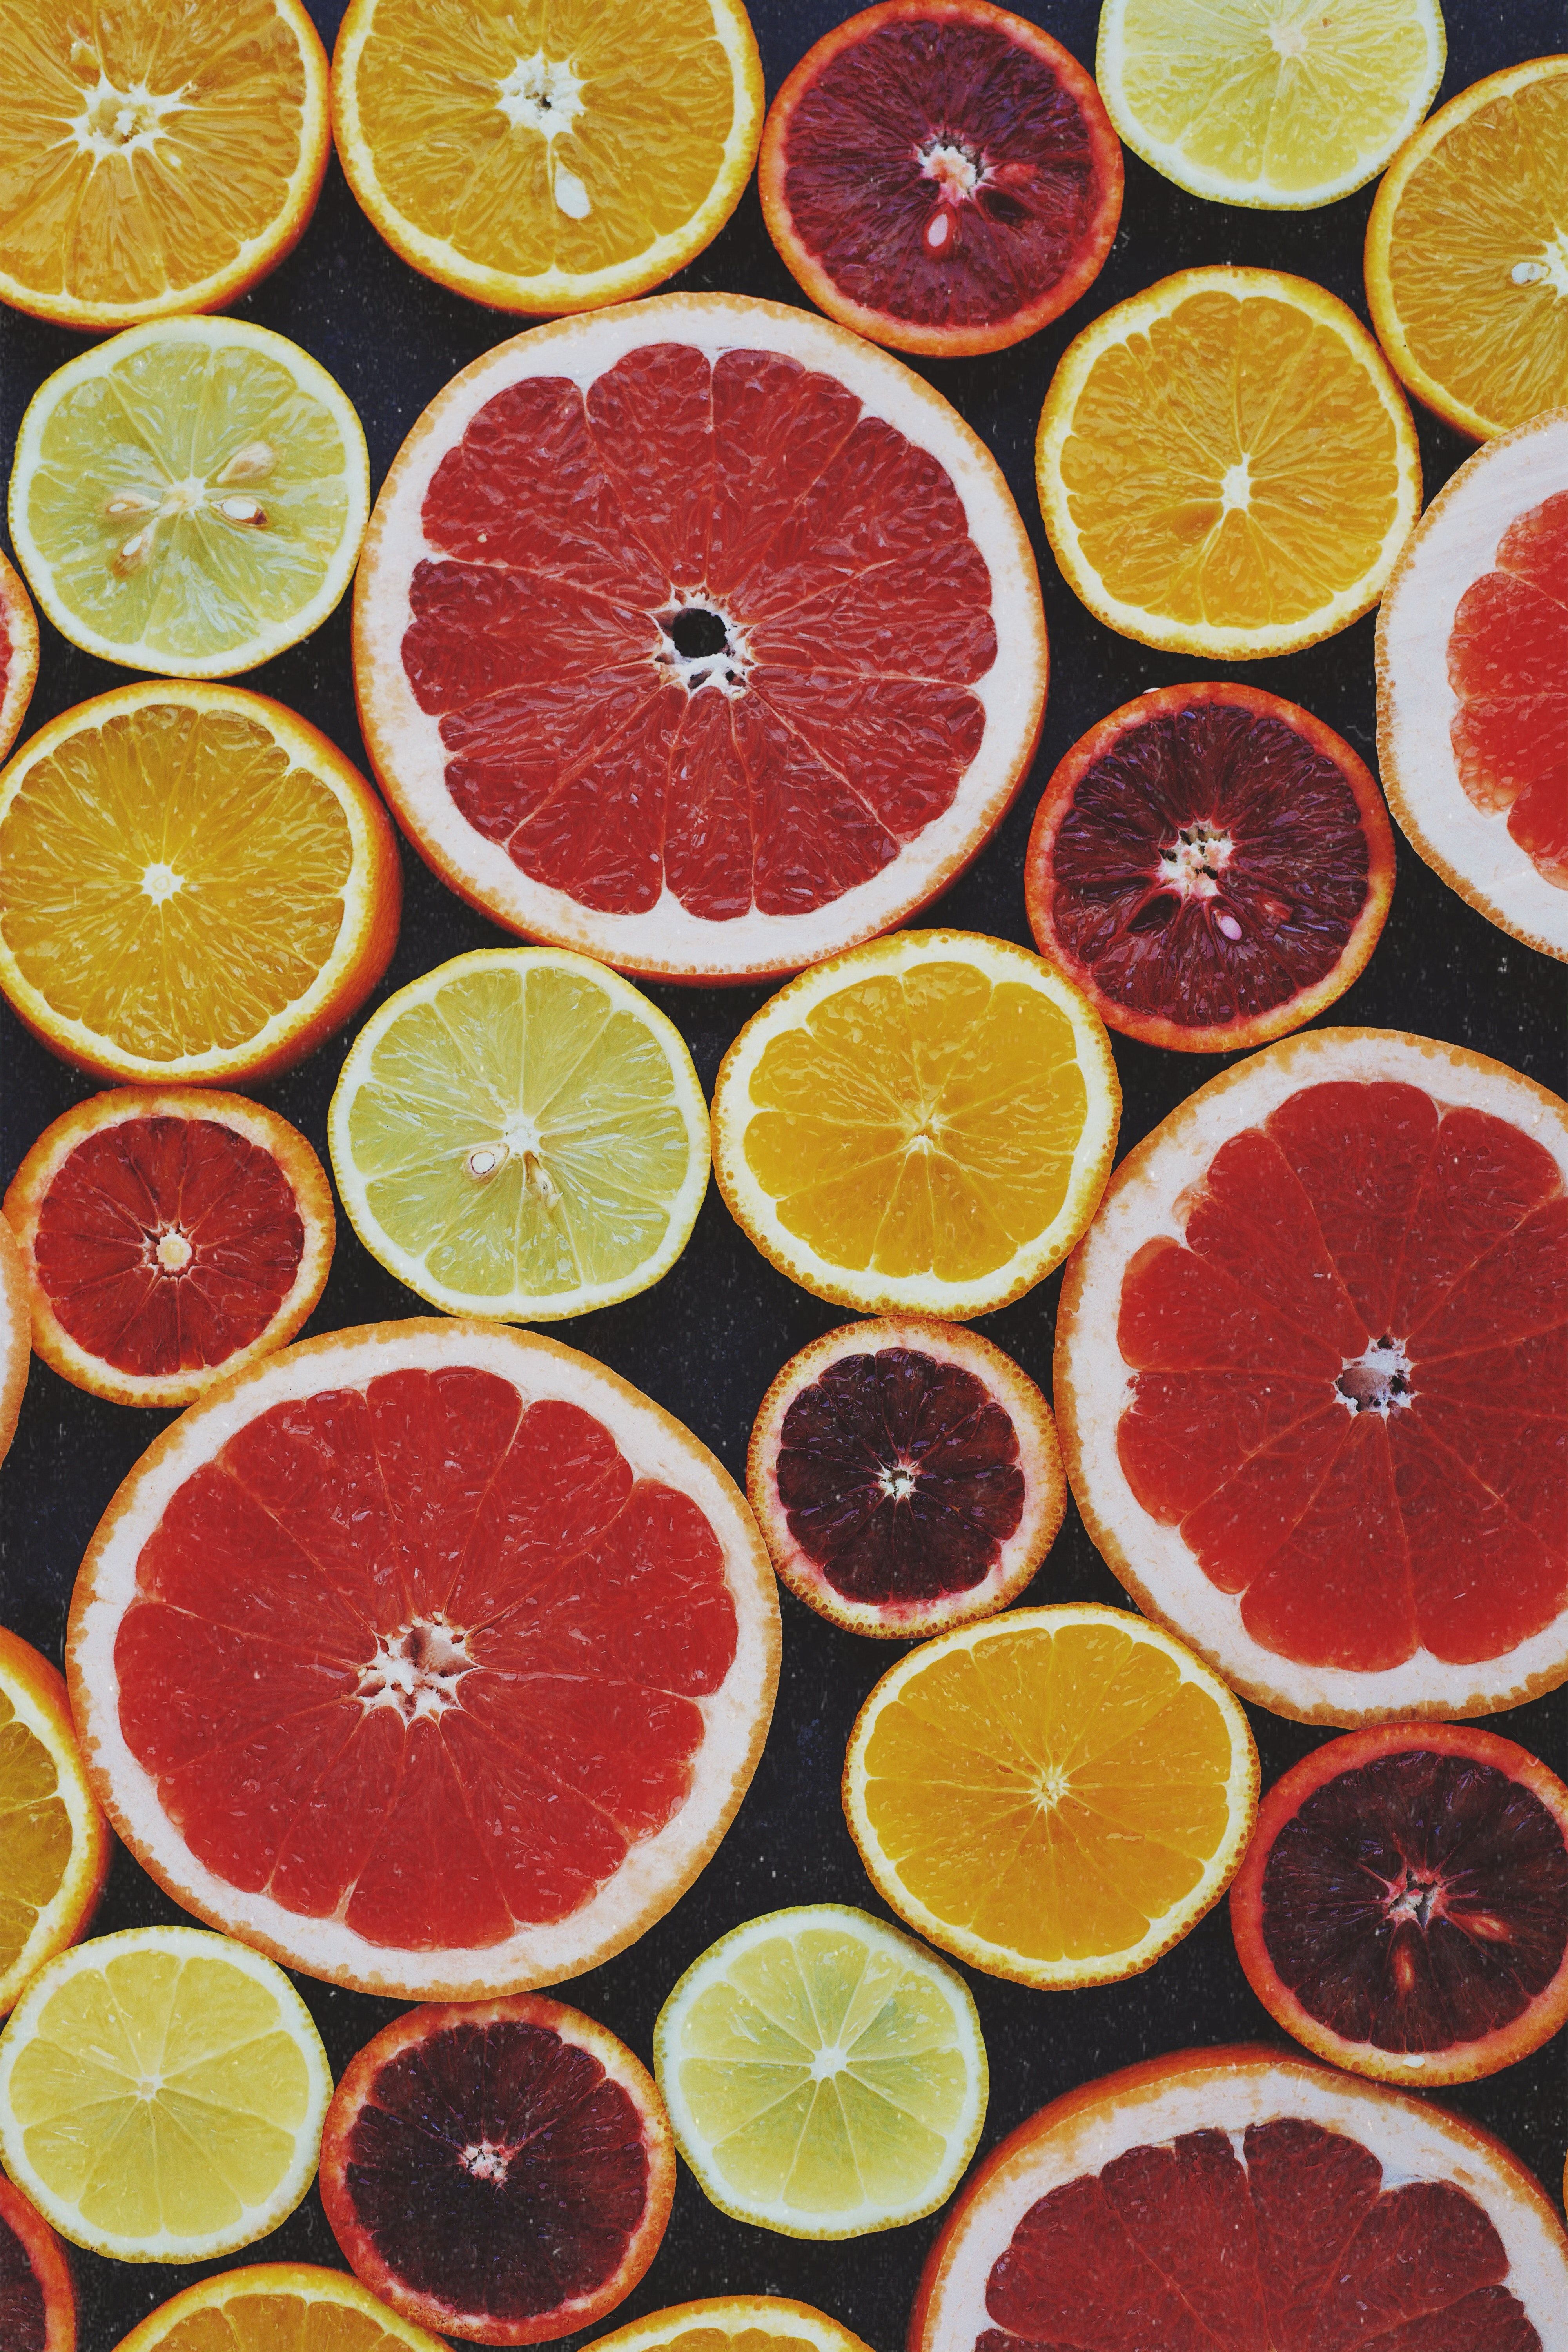 A variety of citrus fruit slices on a black background. - Fruit